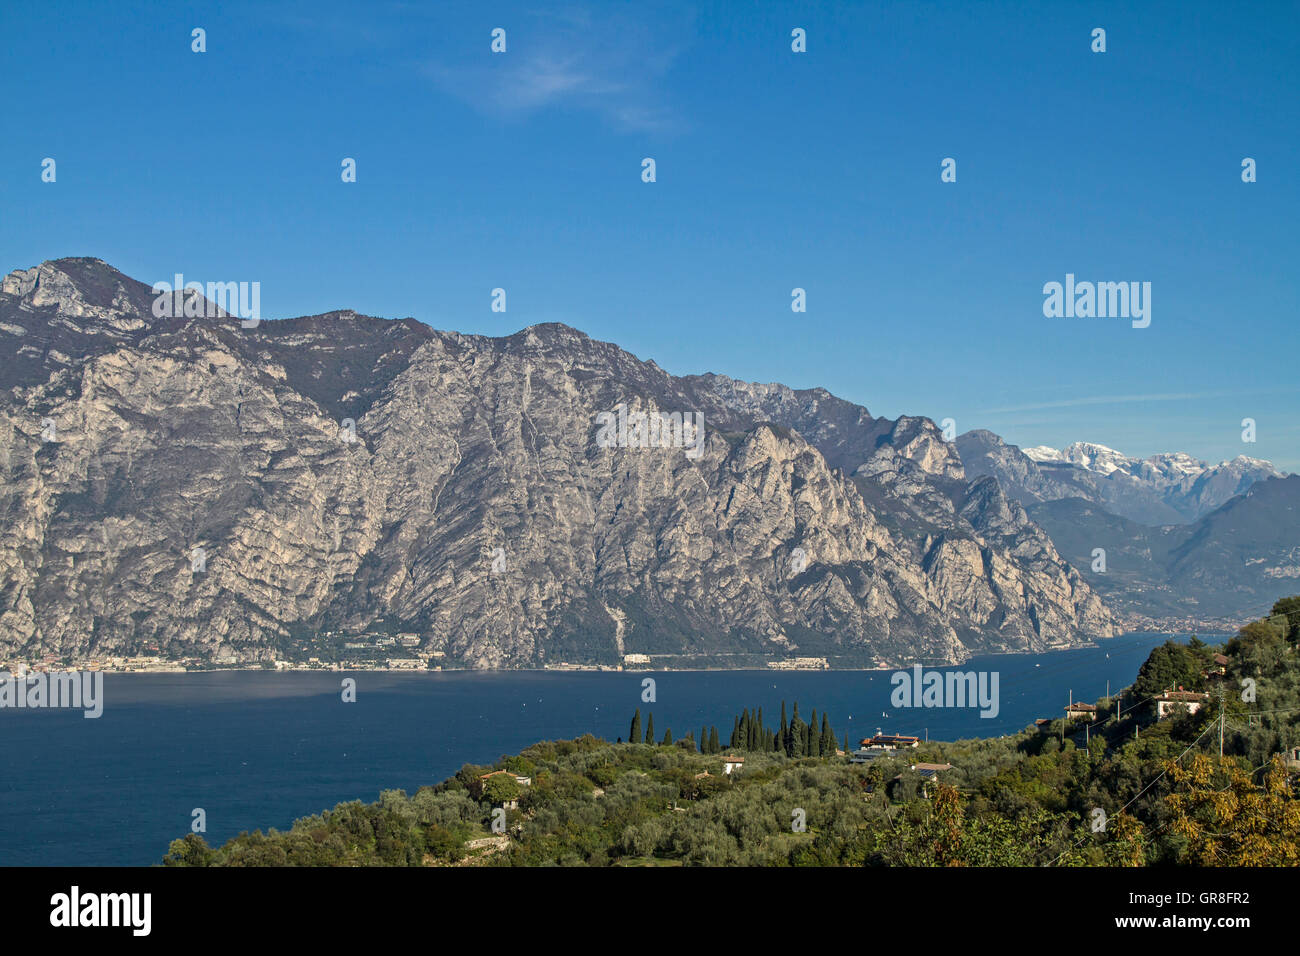 In The Driveway To The Valley Station Of The Monte Baldo Cable Car, You Can Enjoy This Magnificent View Of The Northern Part Of Lake Garda Stock Photo